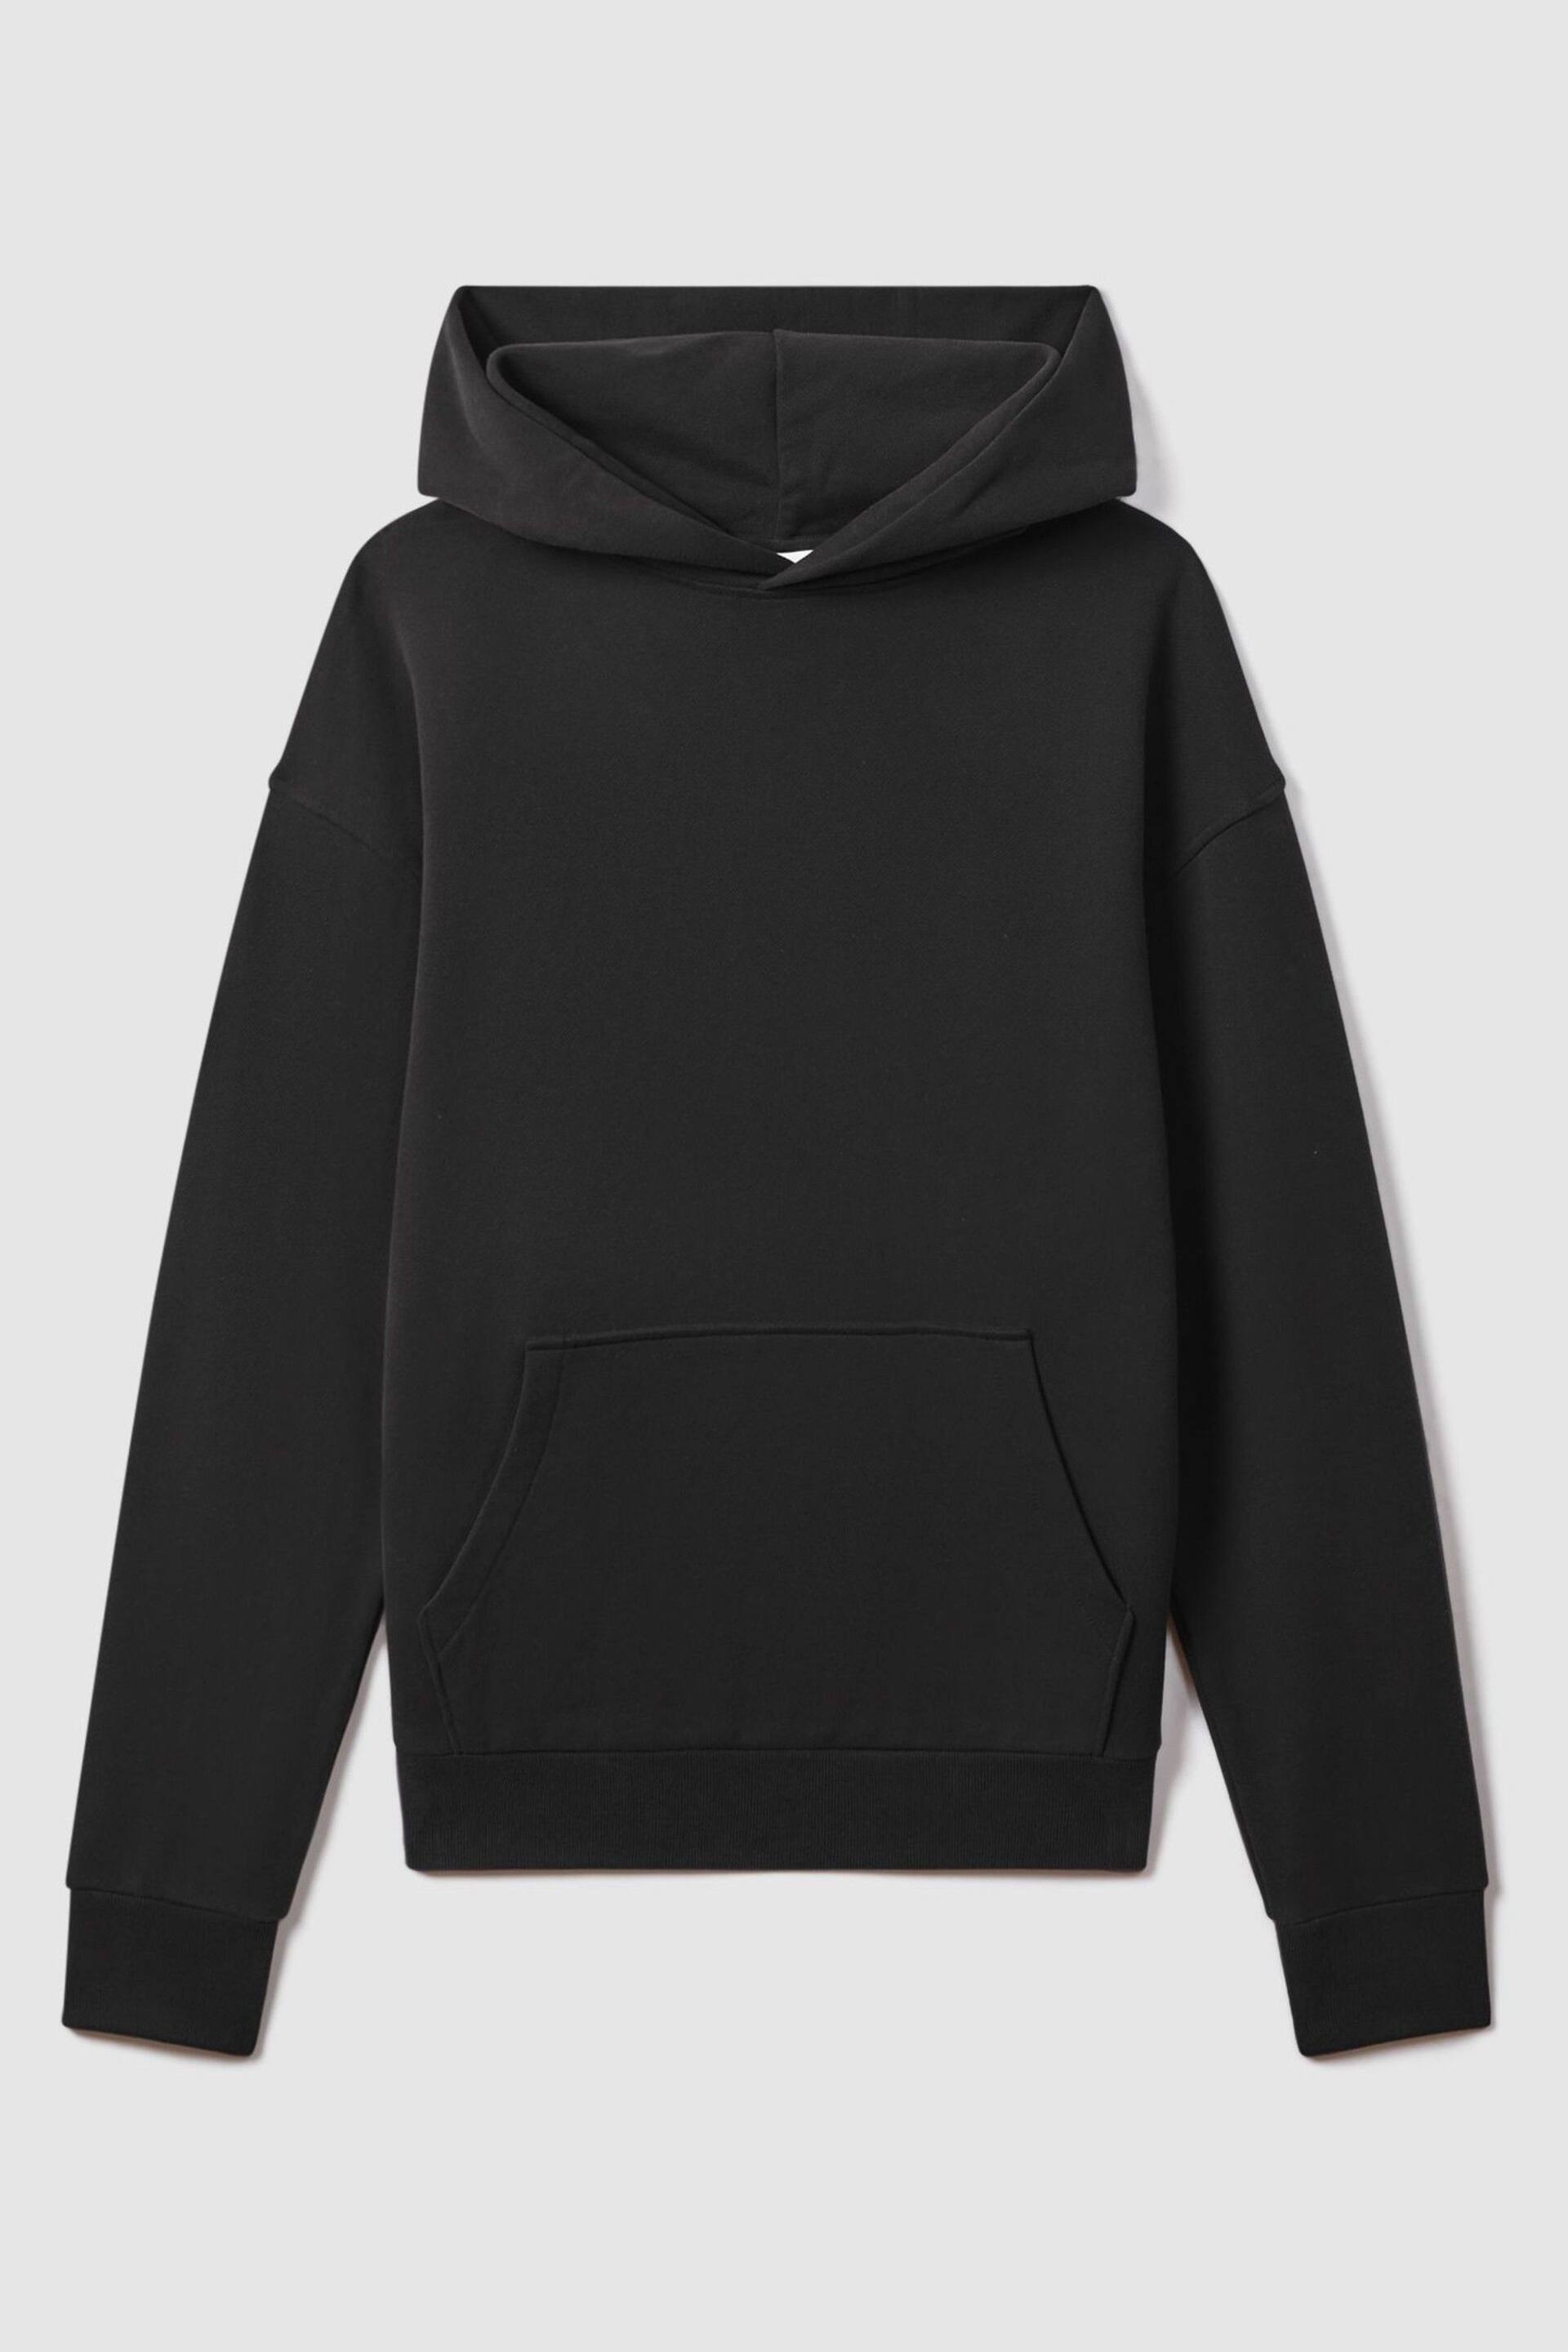 Reiss Washed Black Alexander Casual Fit Cotton Hoodie - Image 2 of 5